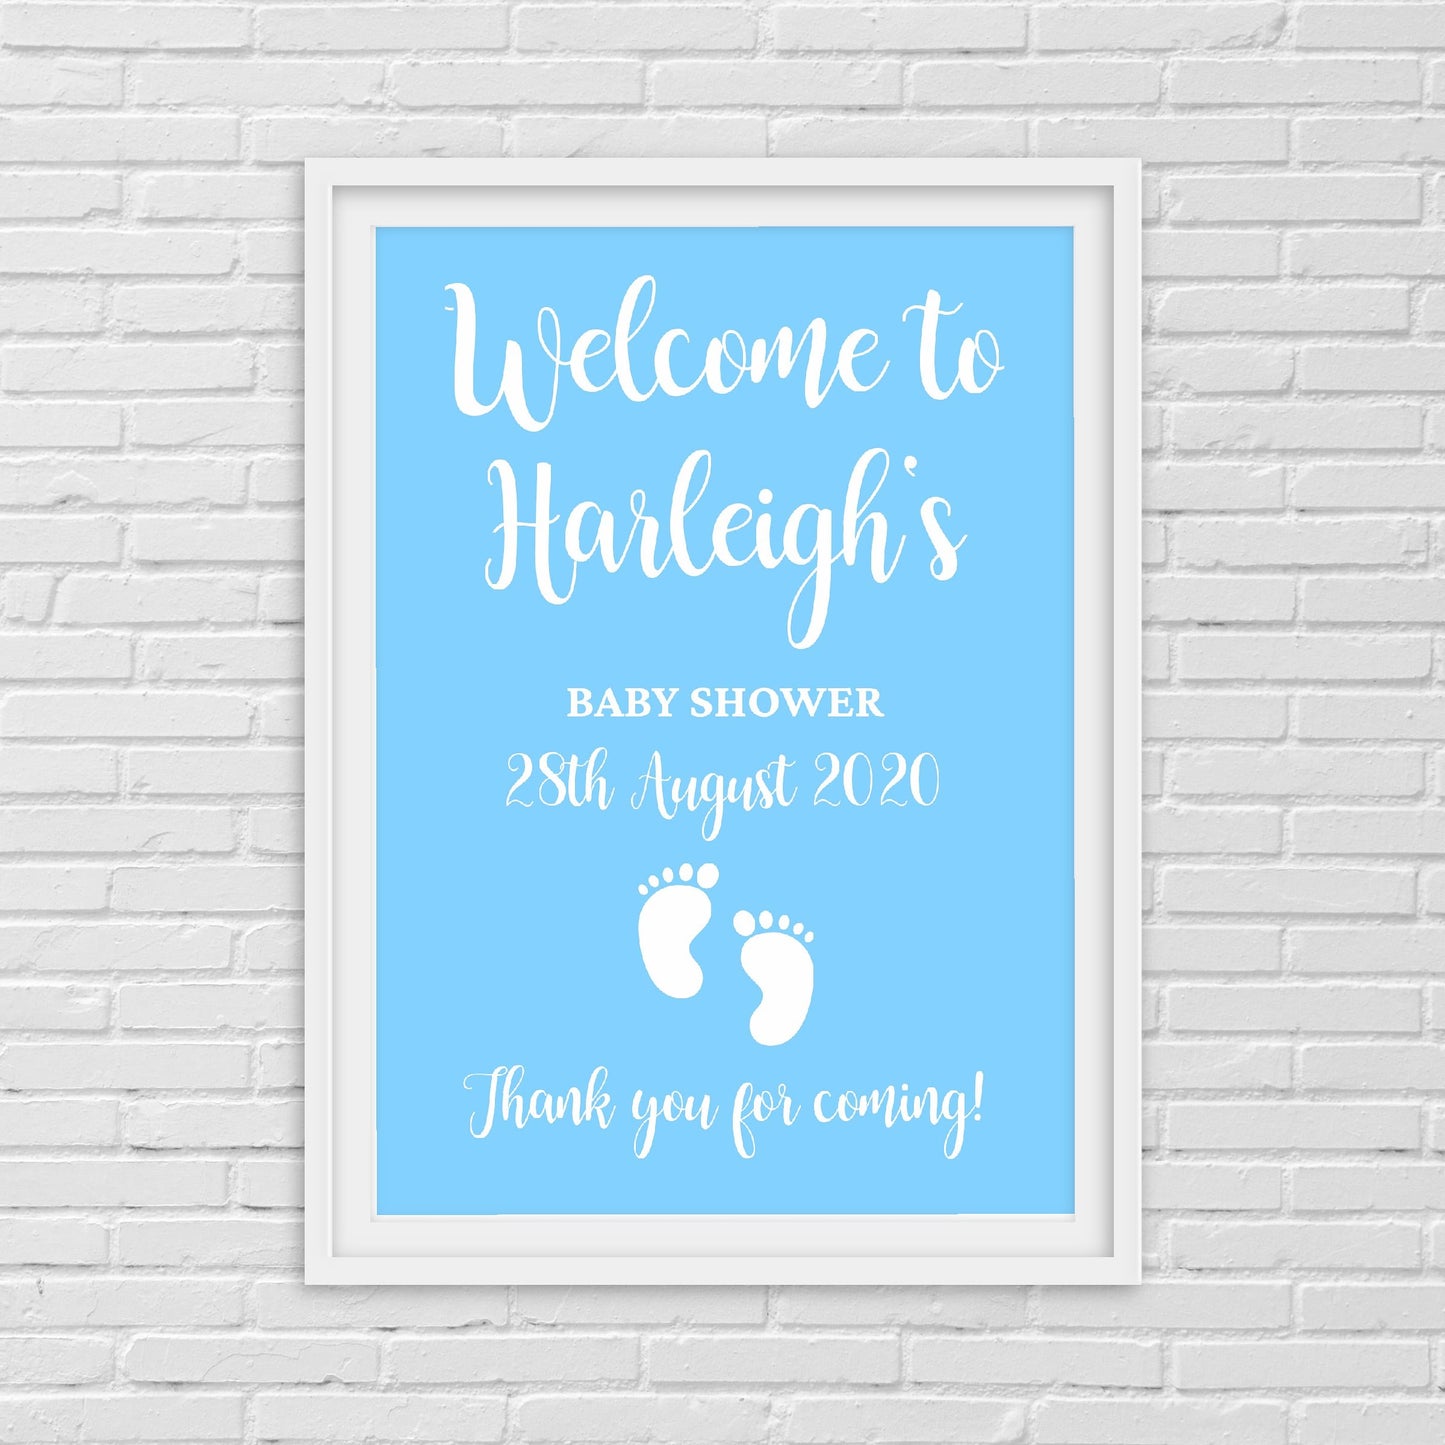 Baby Shower Print | Baby Shower Welcome Print | Baby Shower Décor | Baby Shower